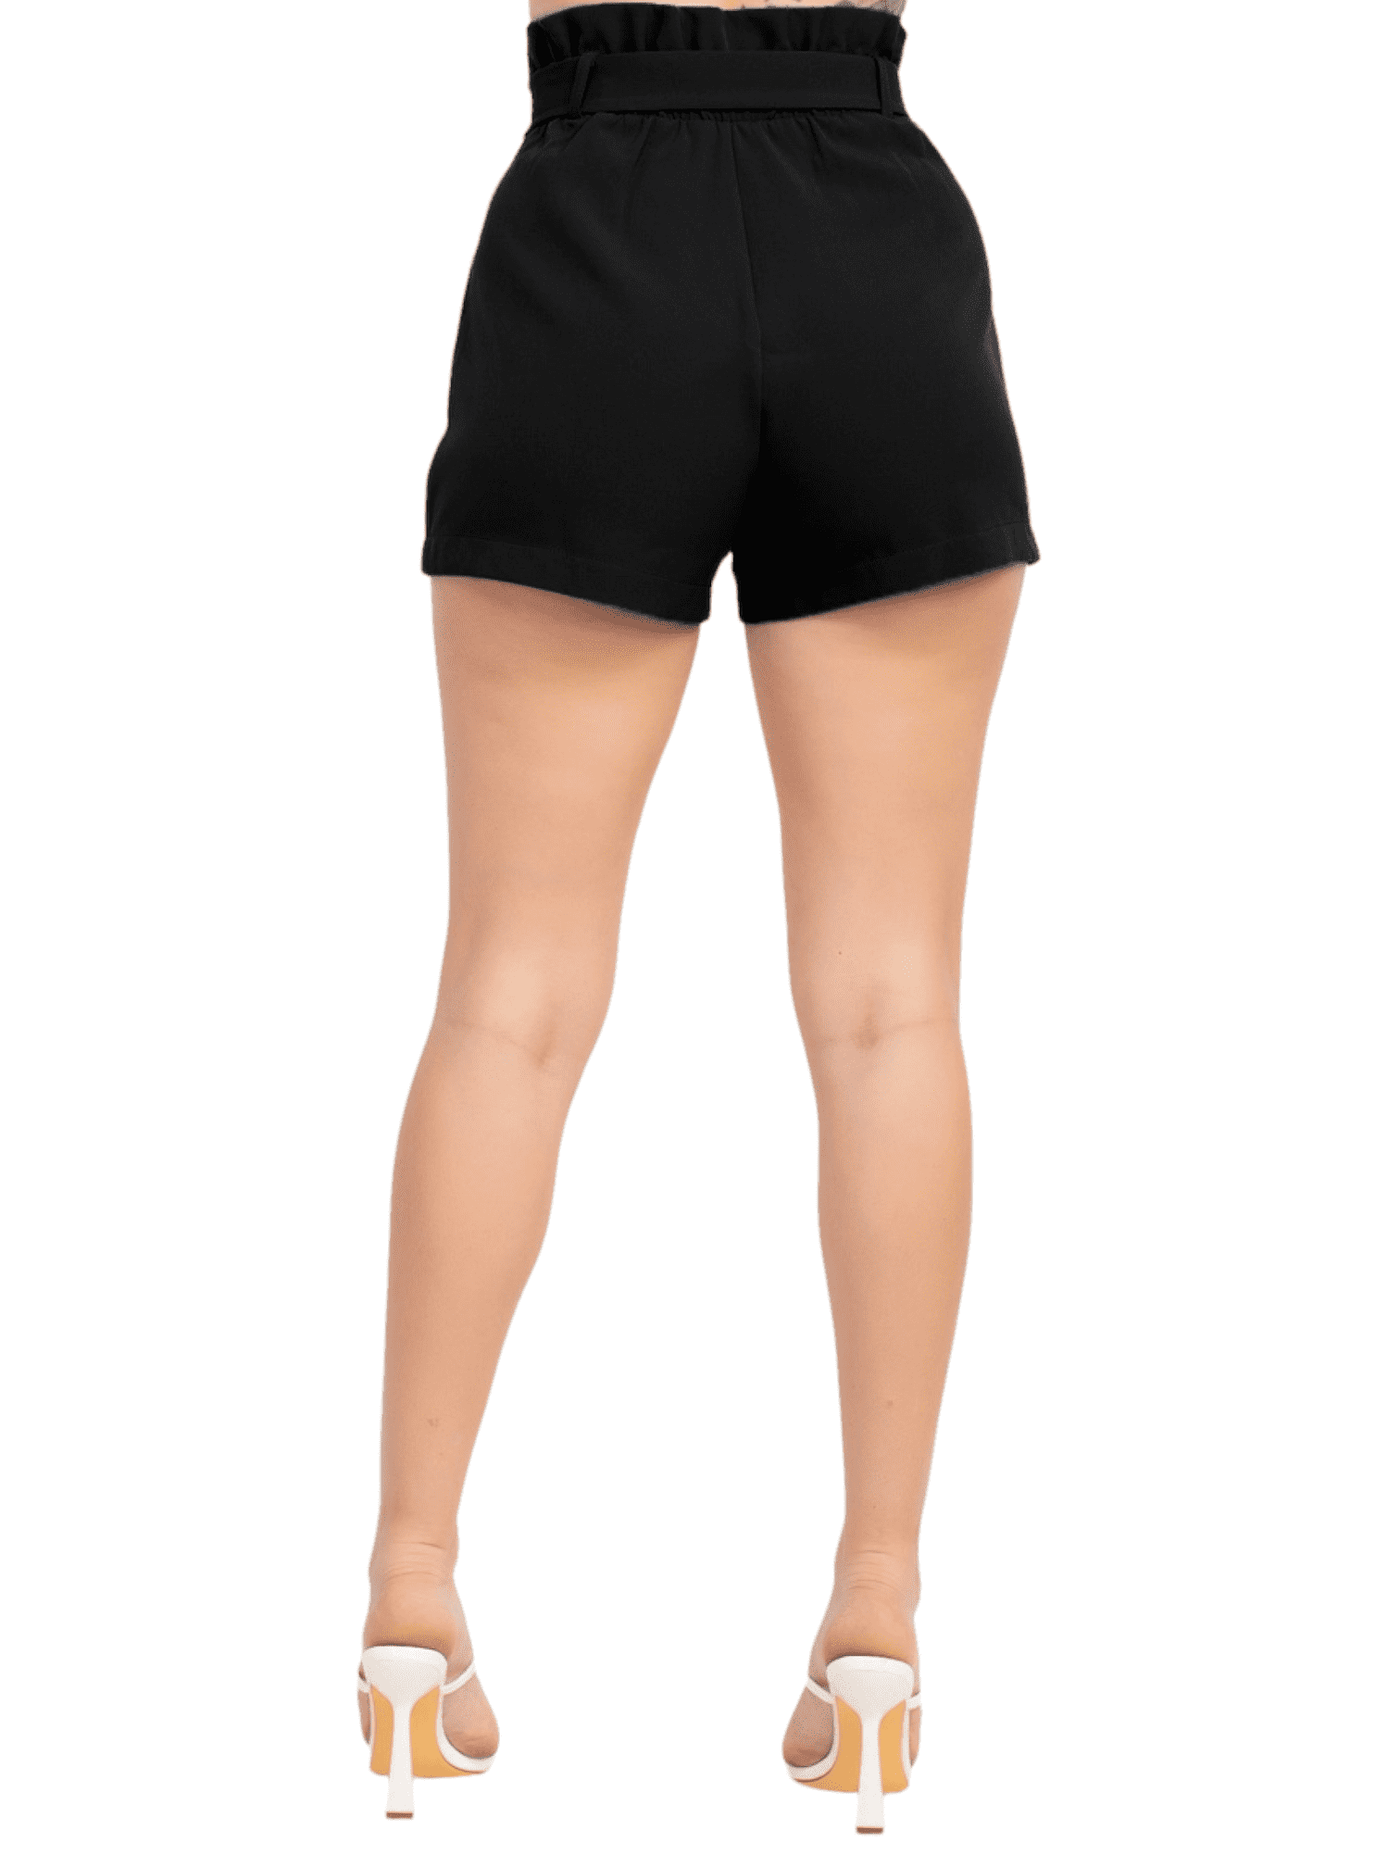 Thinking About You Shorts-Black